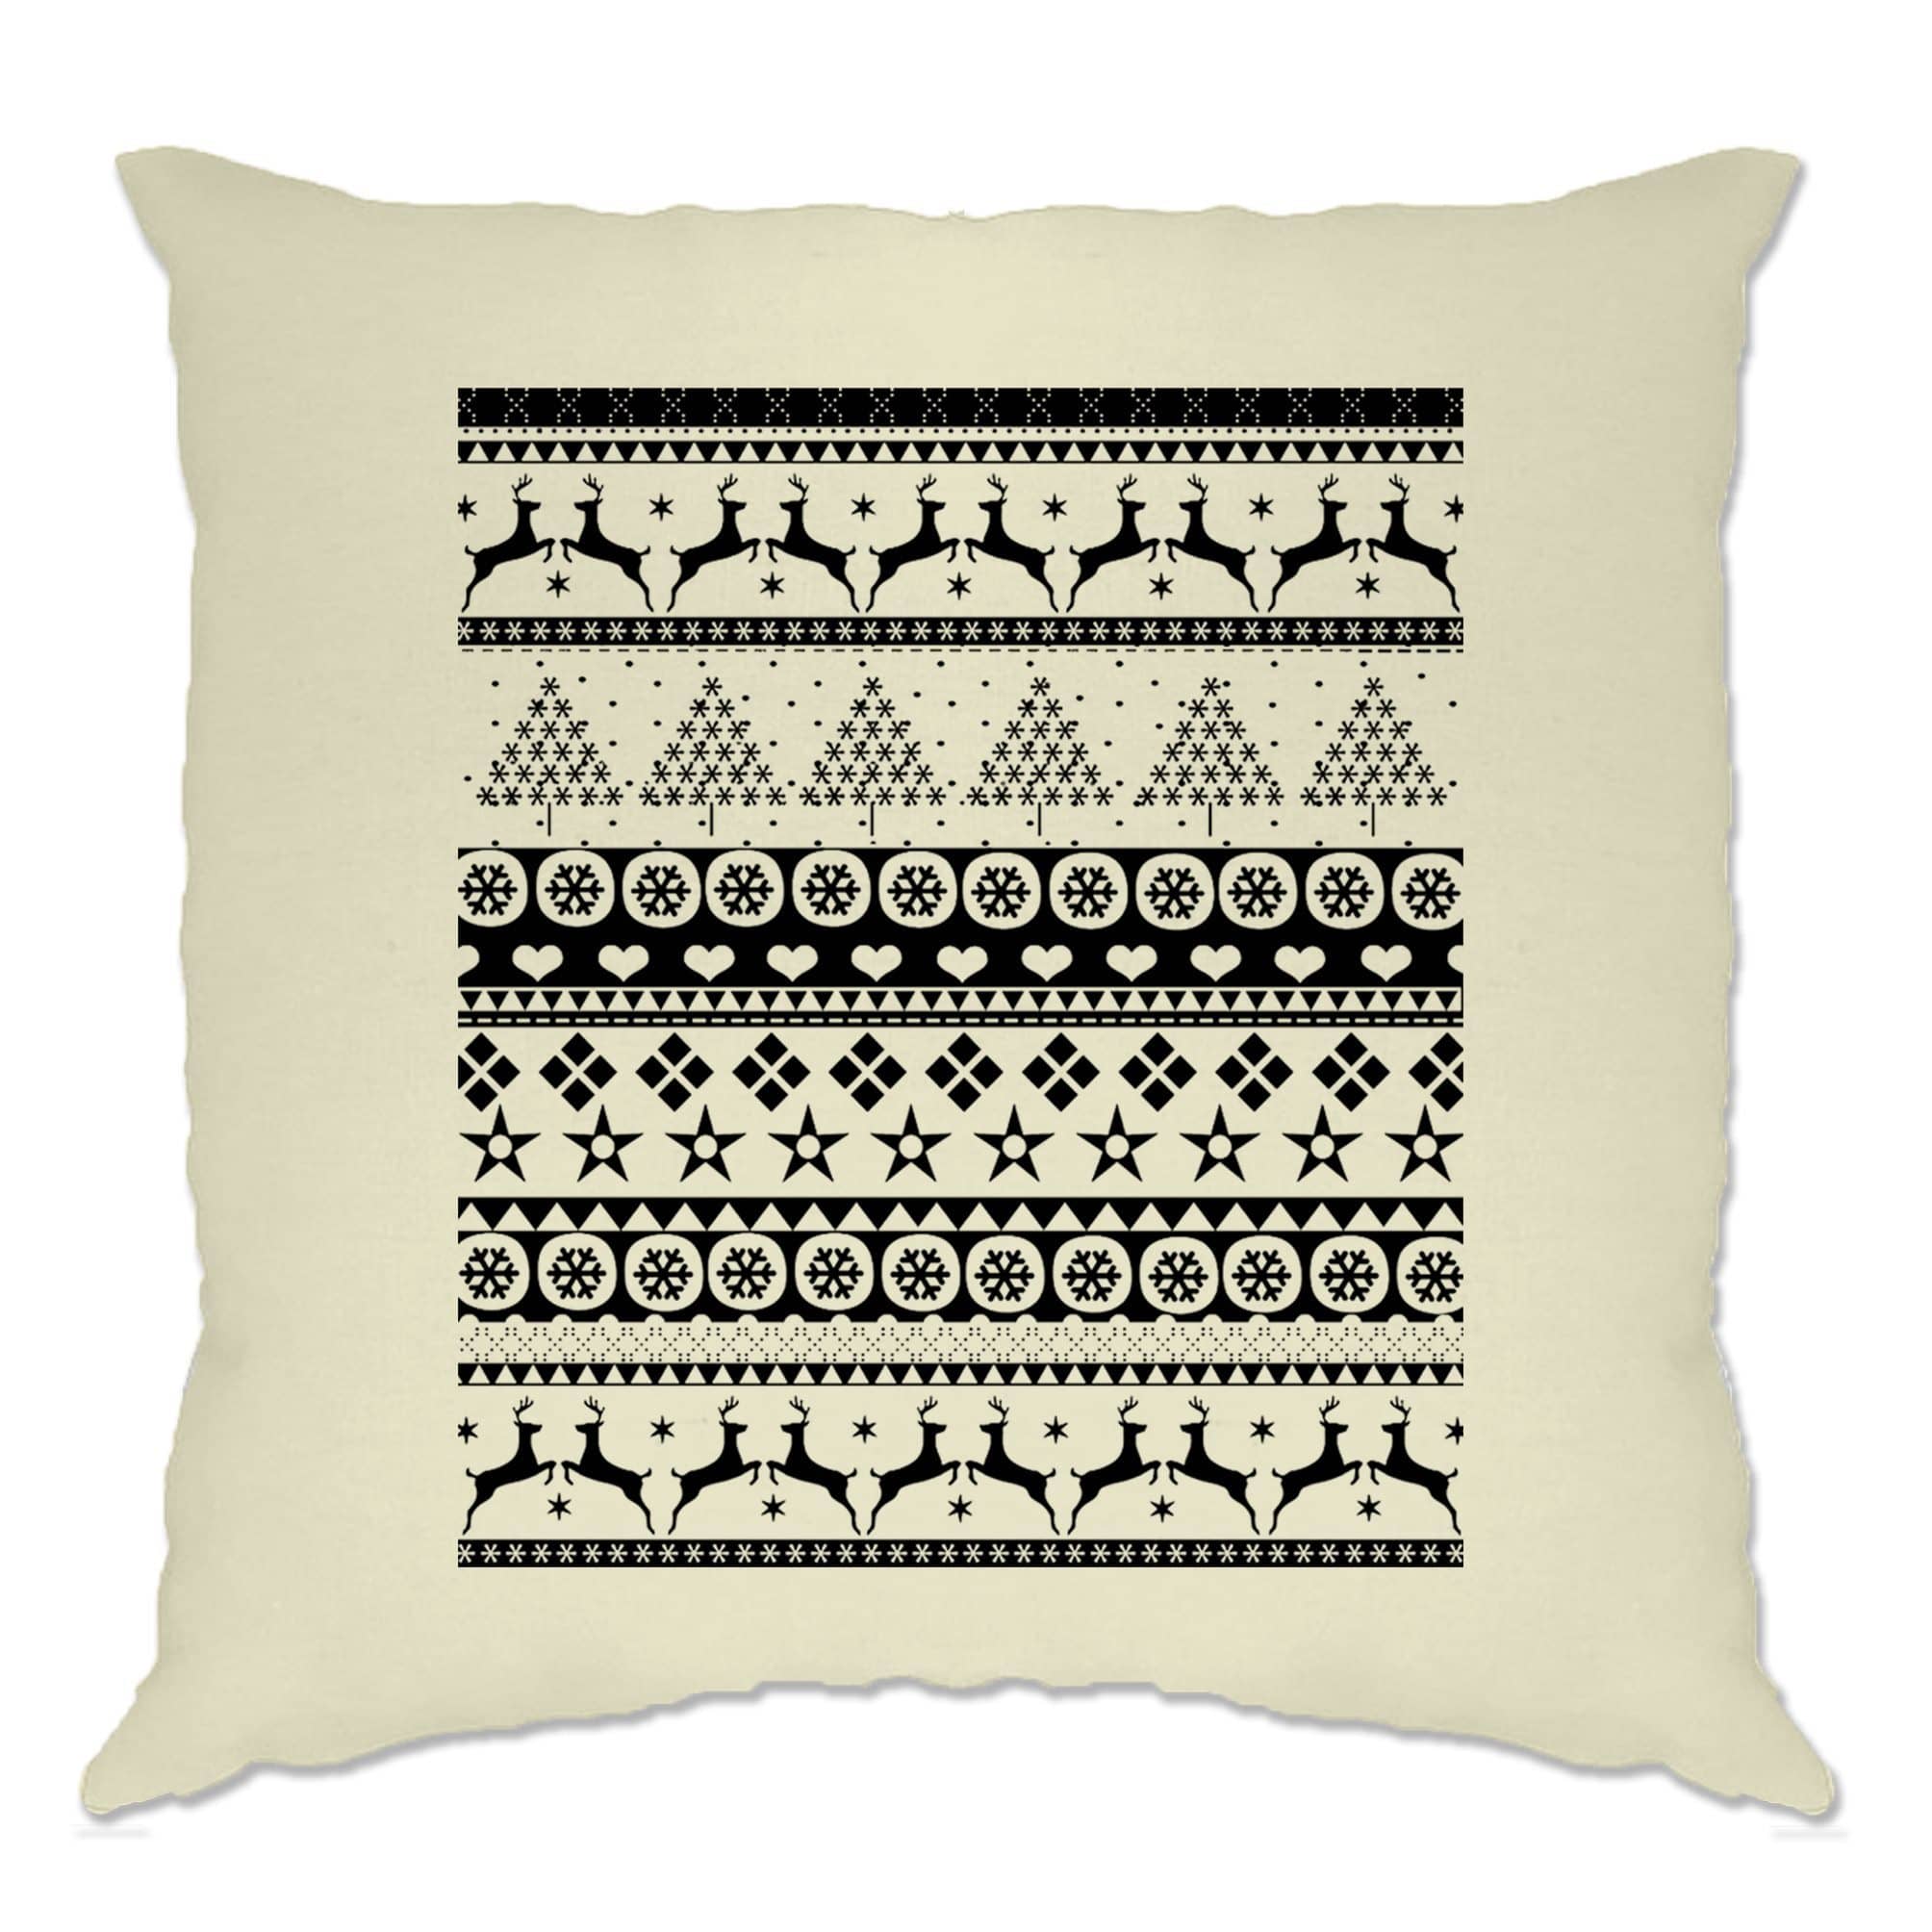 Christmas Cushion Cover Xmas Ugly Sweater Pattern